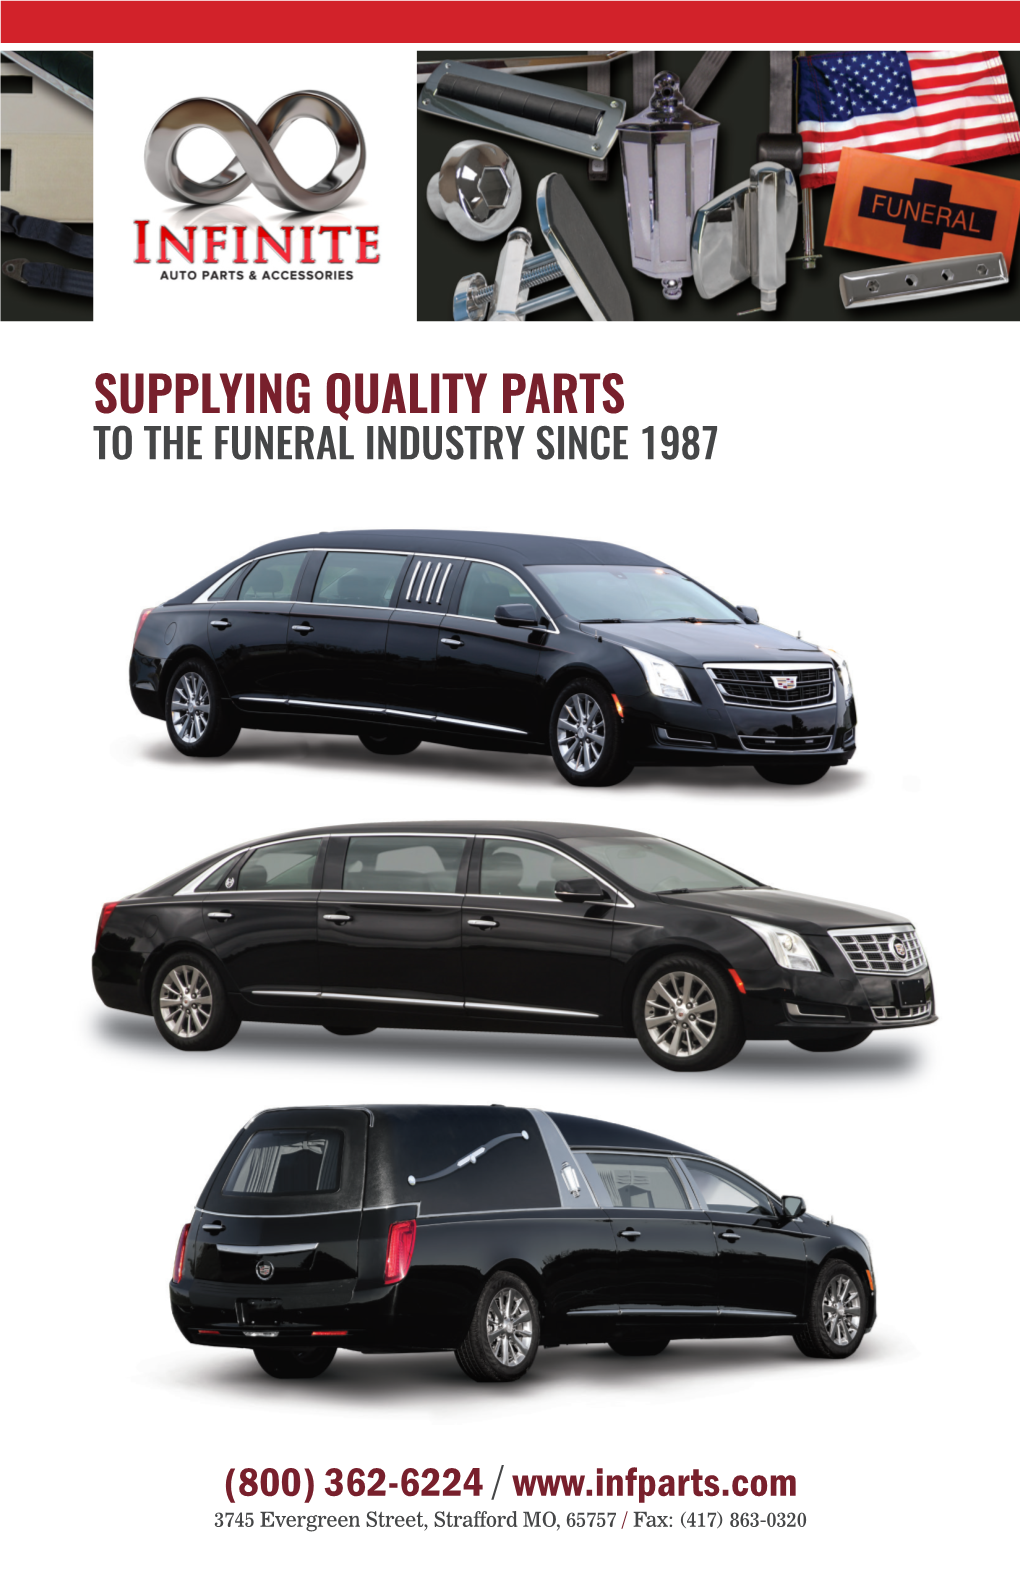 Supplying Quality Parts to the Funeral Industry Since 1987